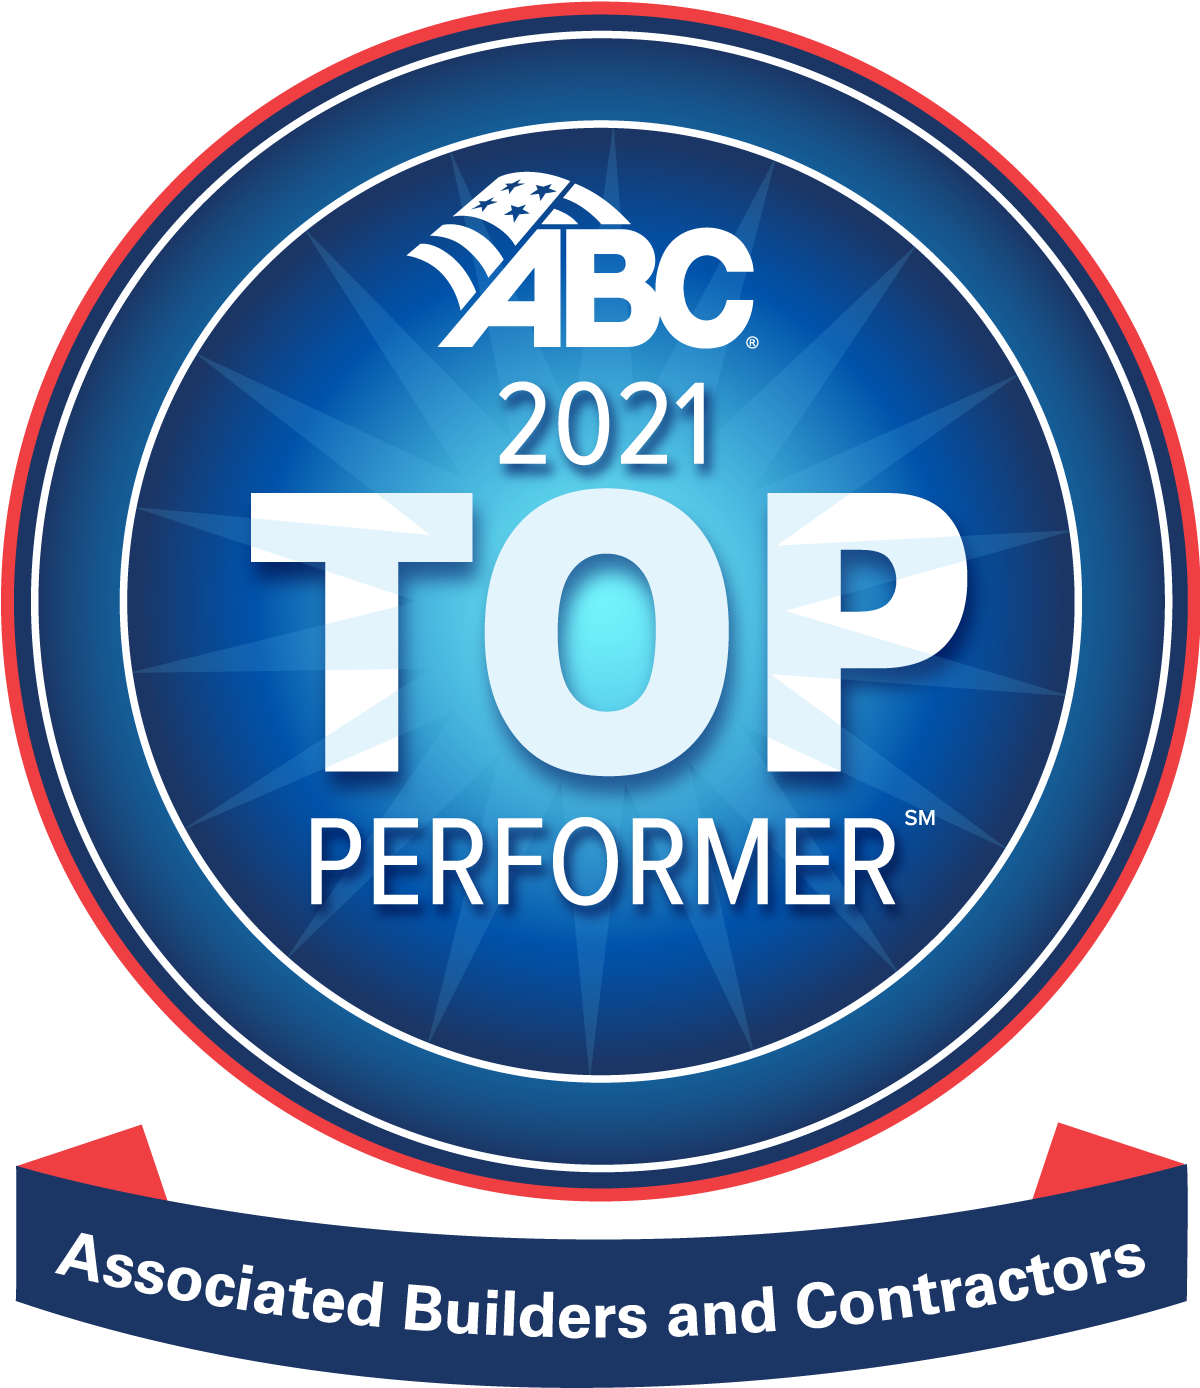 Rk Named A Top Performing U S Construction Company By Abc Rk